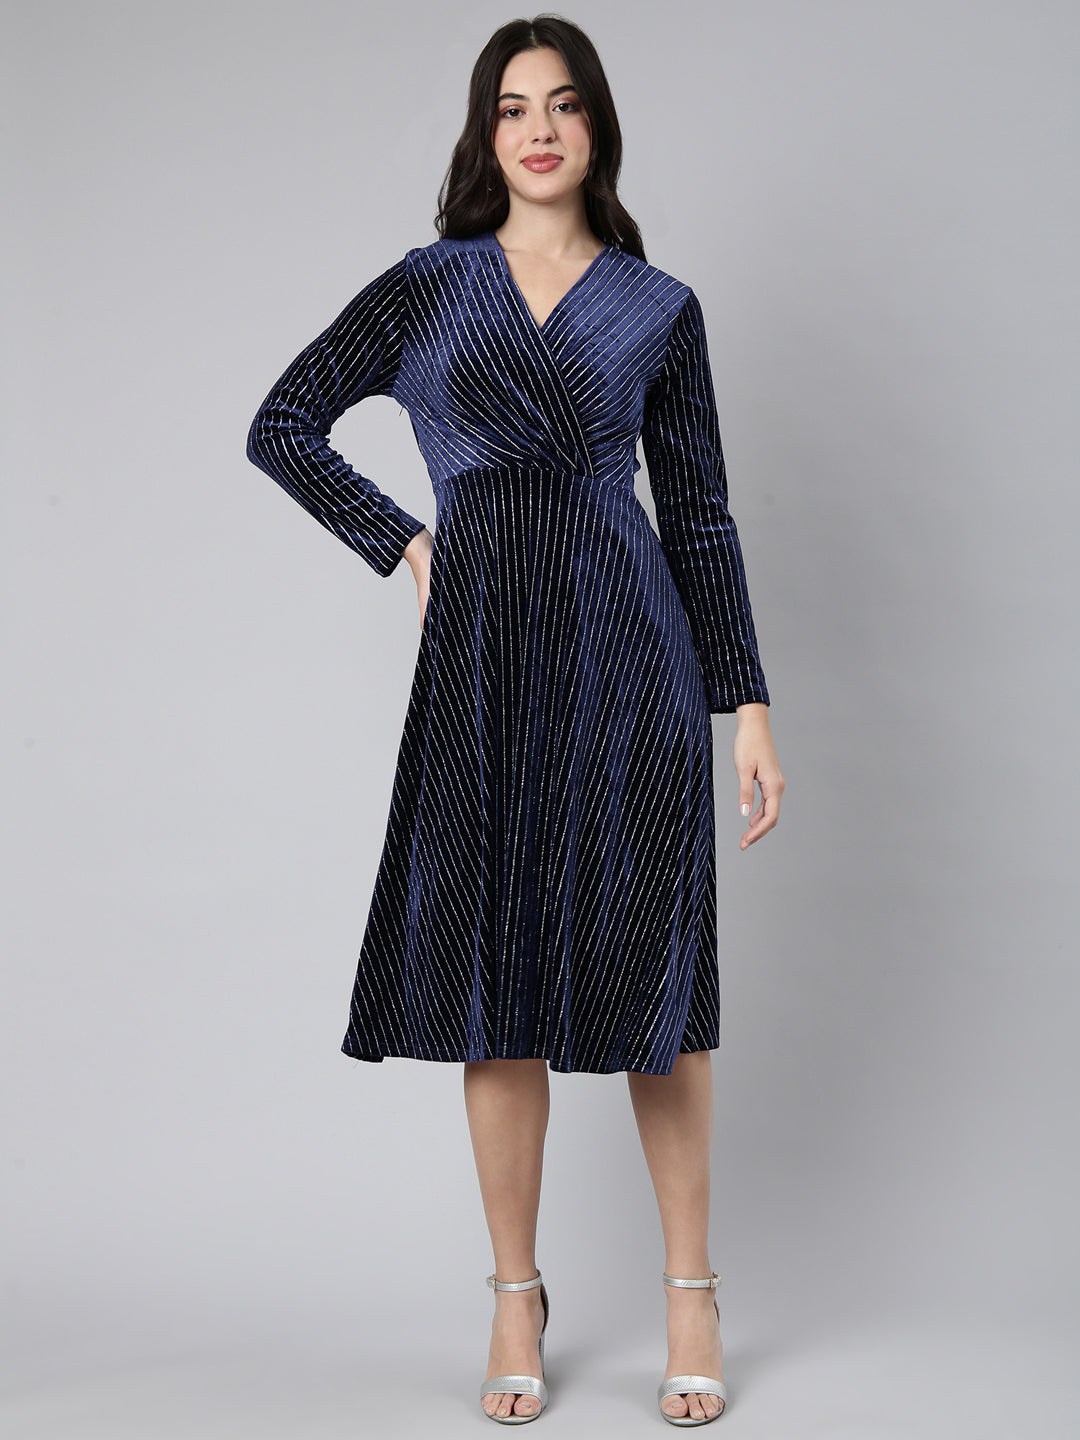 Women Striped Navy Blue Fit and Flare Dress